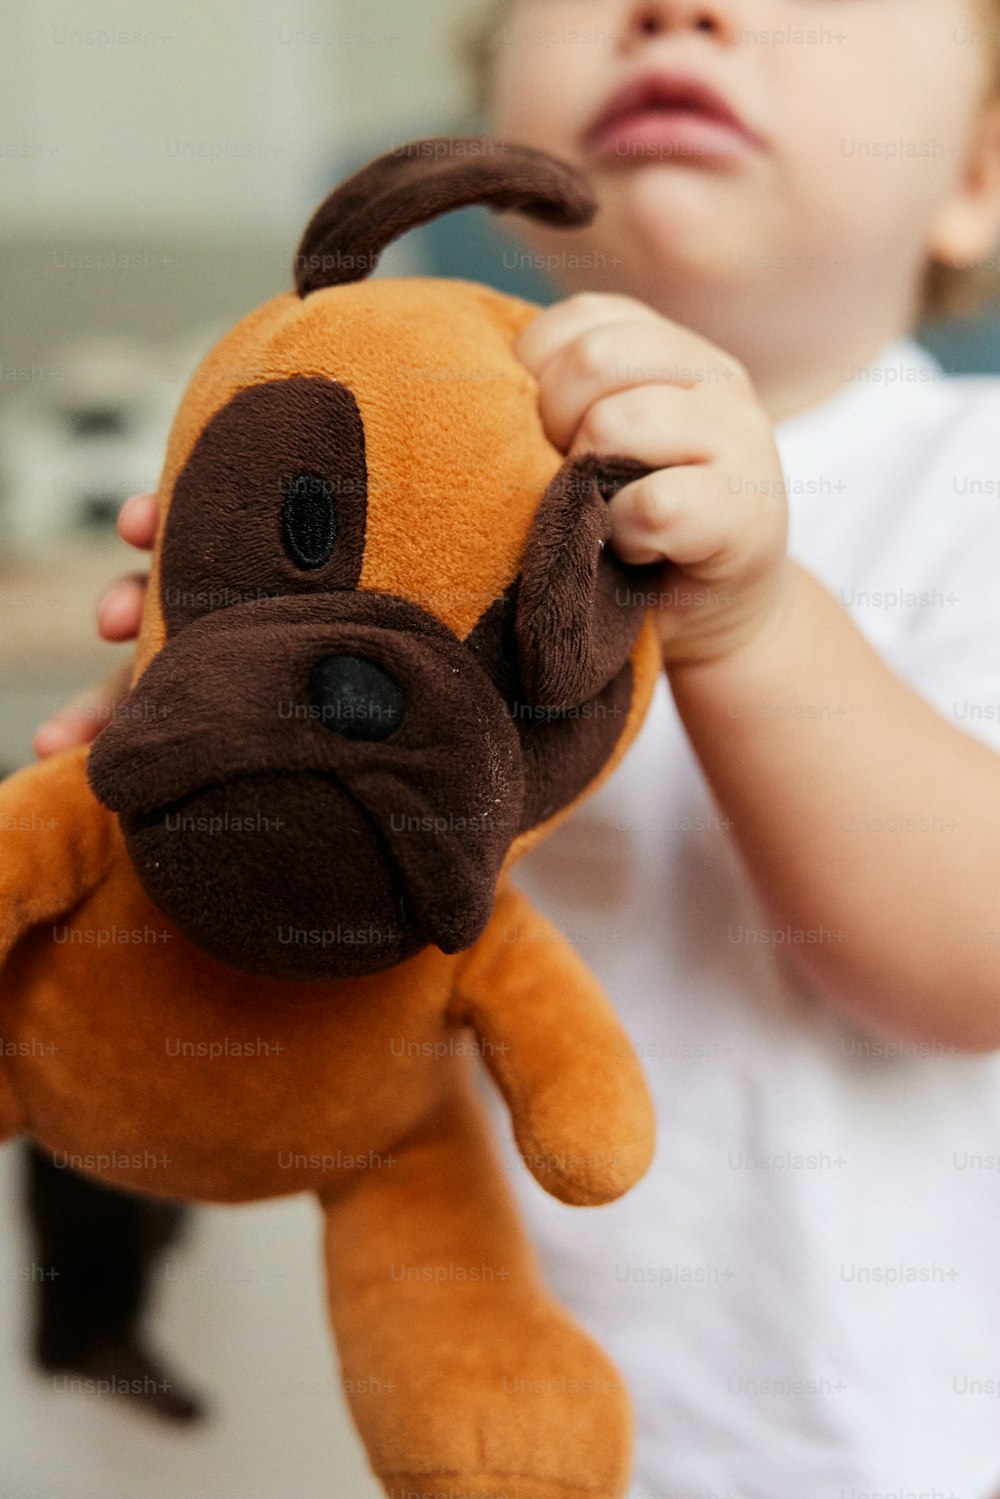 a little boy holding a stuffed animal in his hands